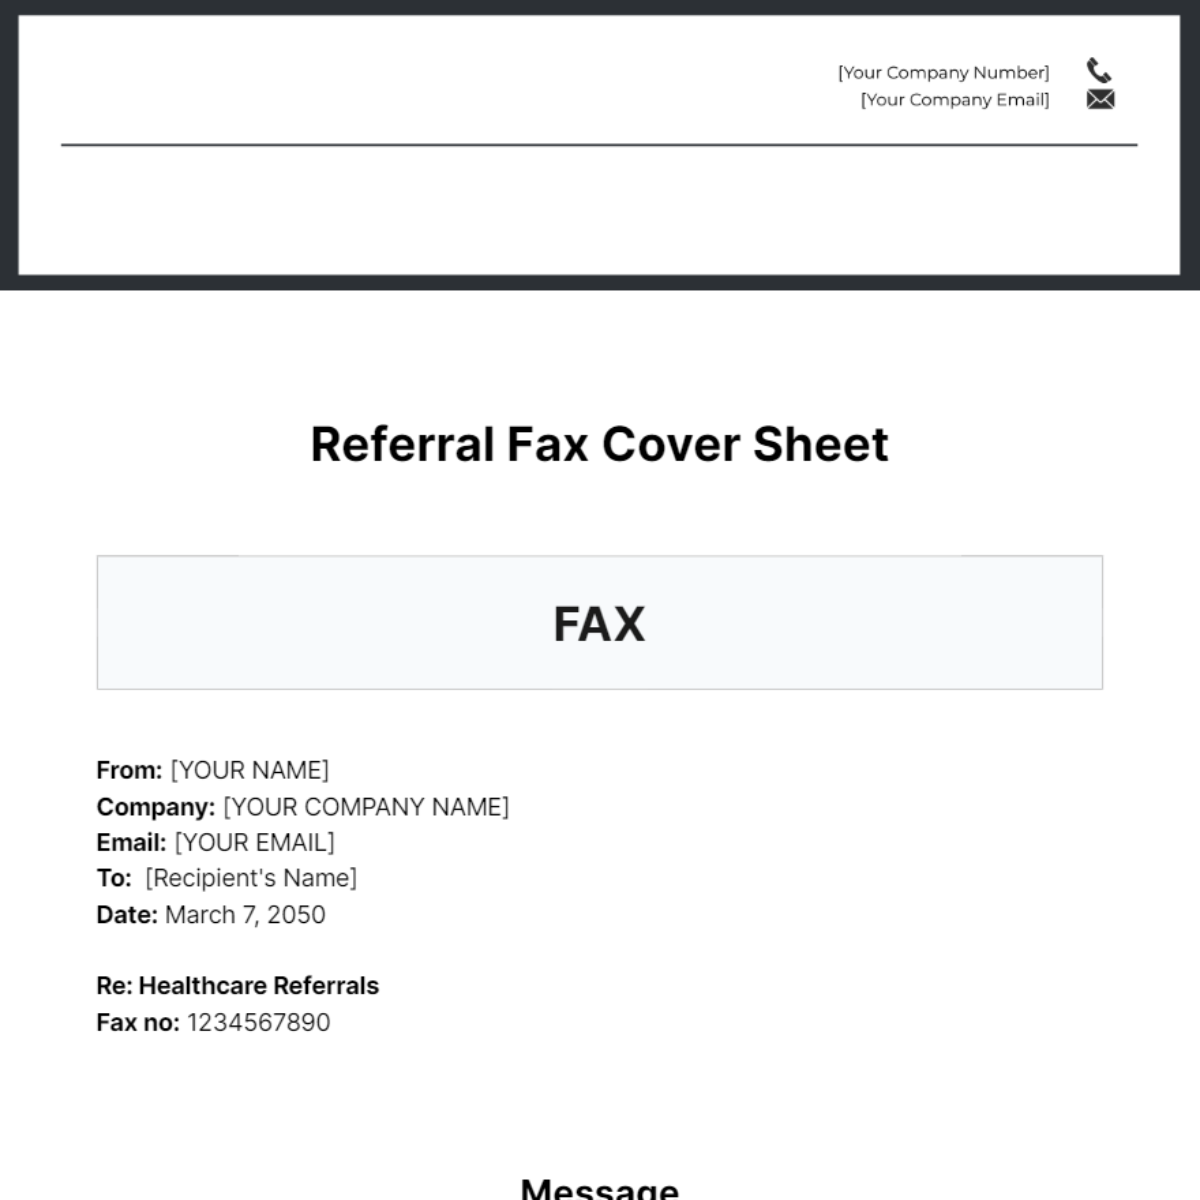 Referral Fax Cover Sheet